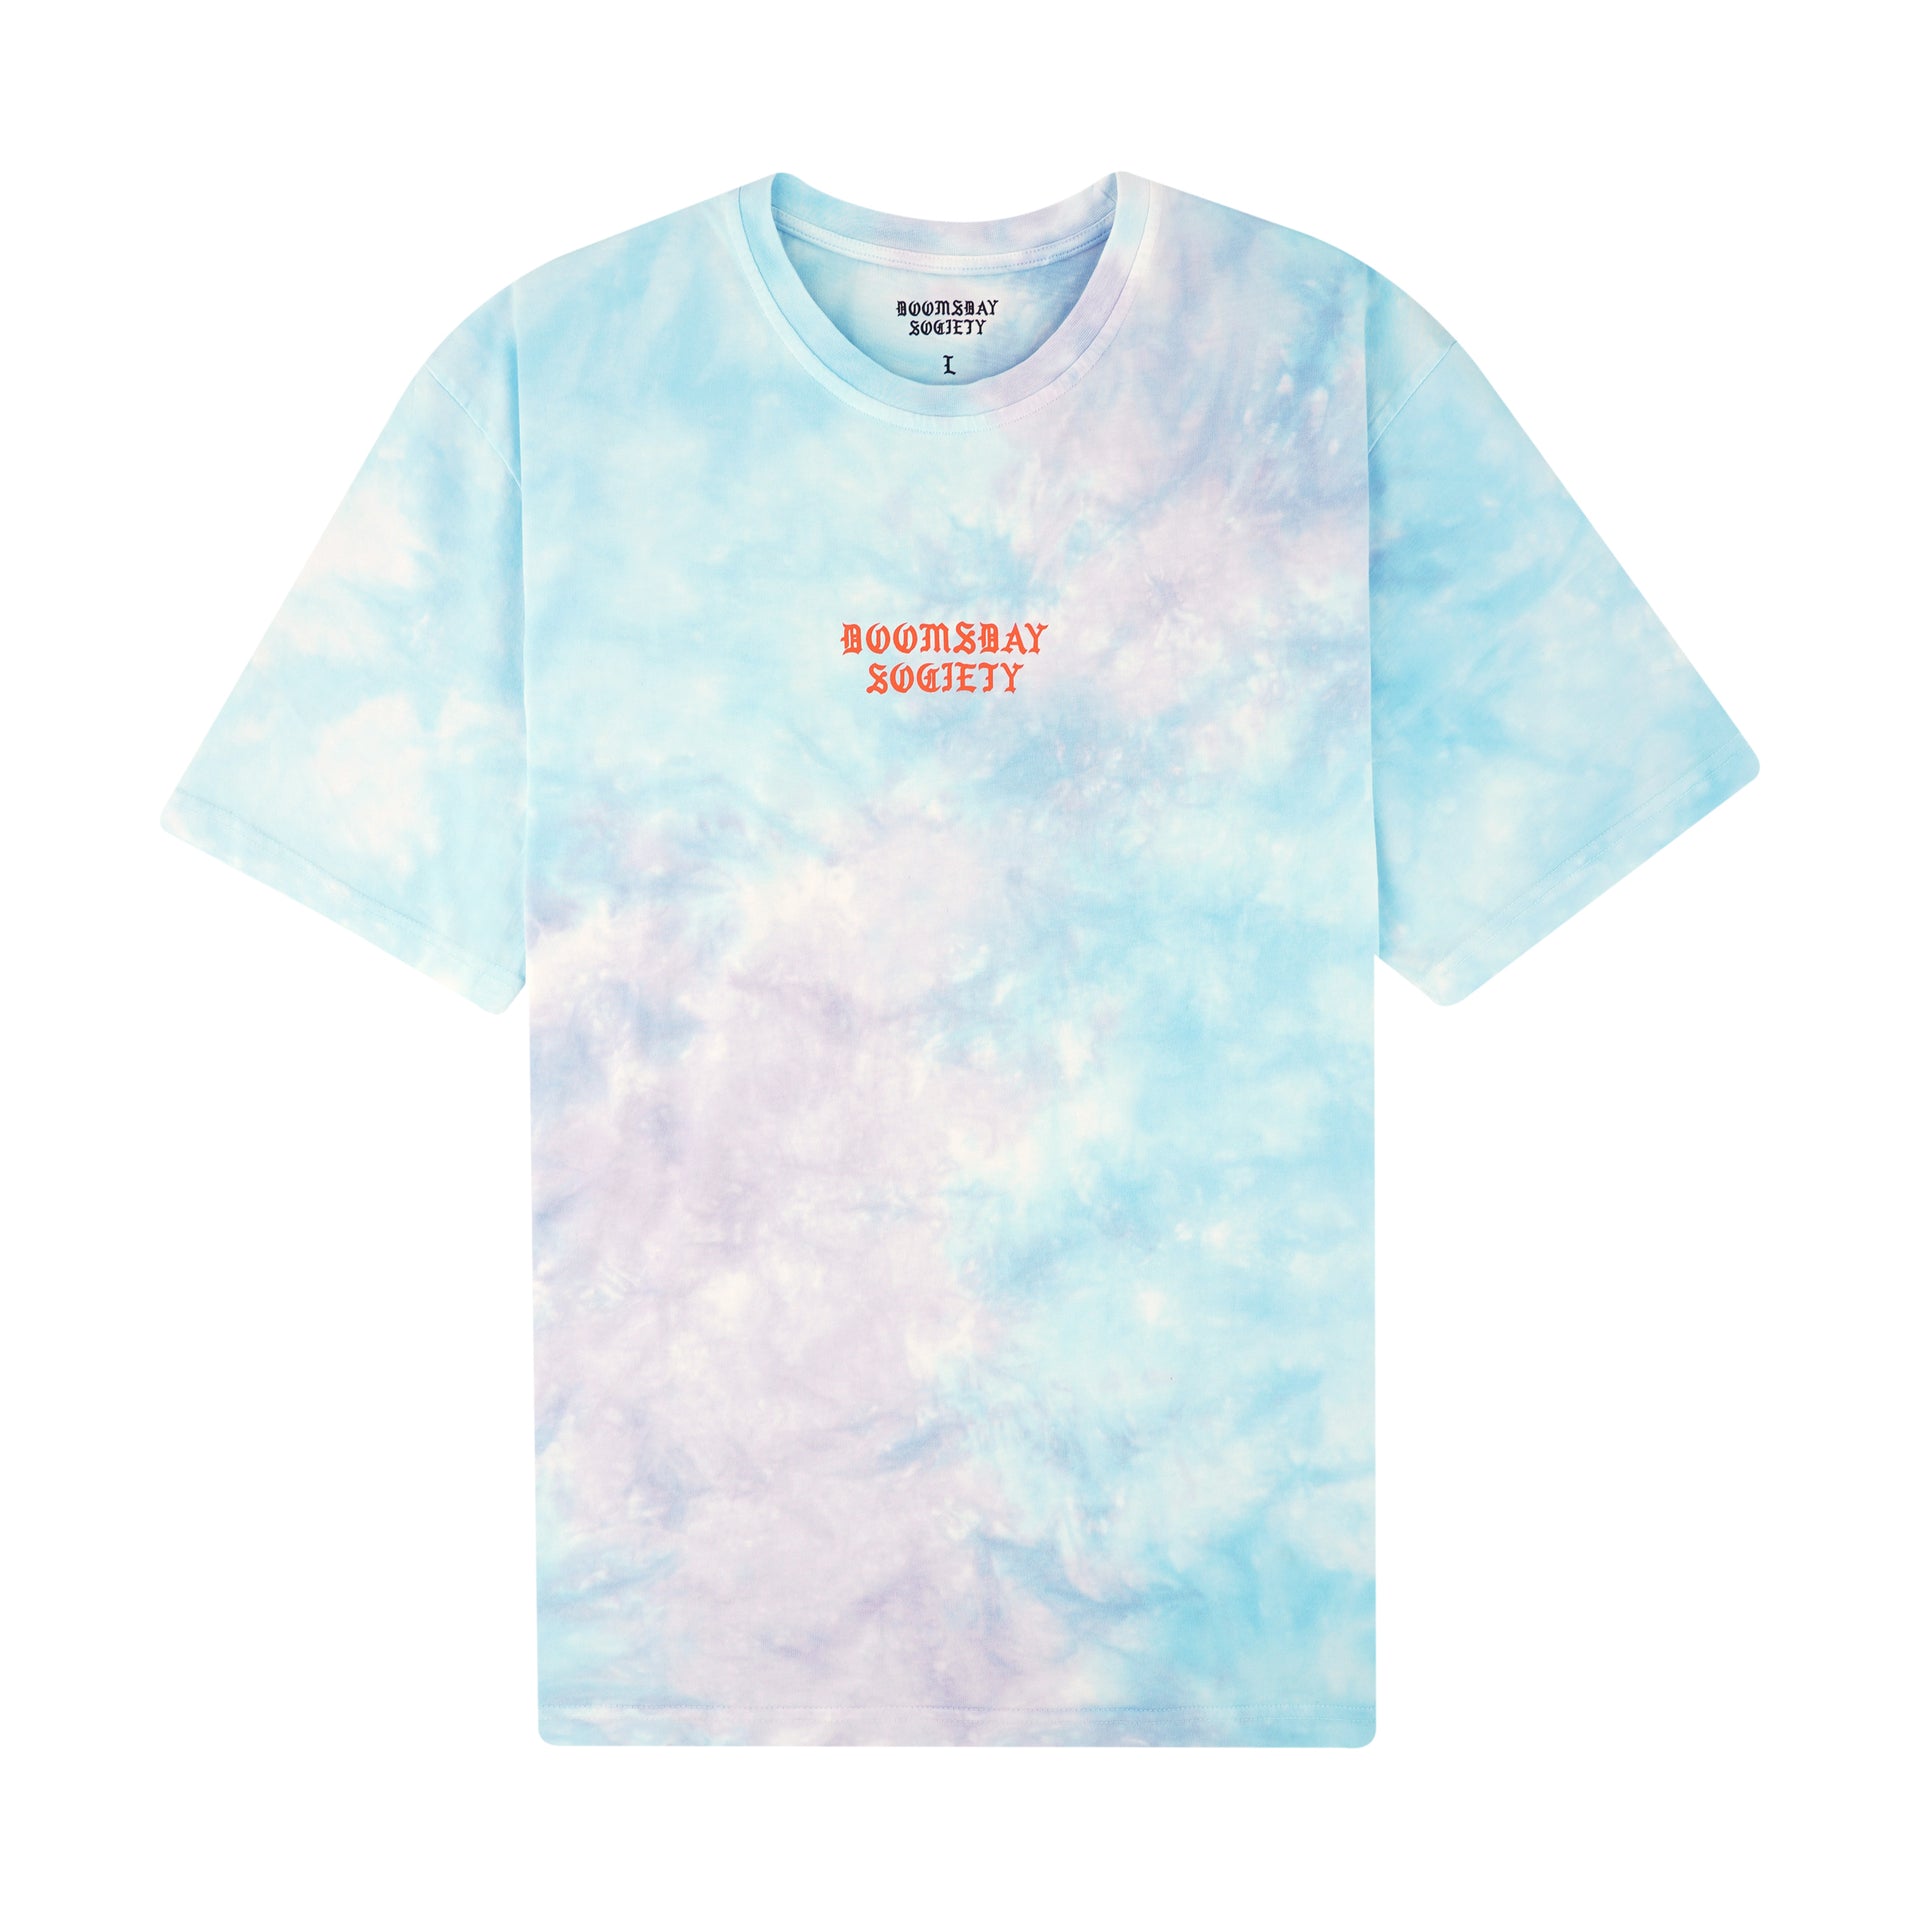 Tie Dye Slime Tongue Kids T-Shirt – RS No. 9 Carnaby St.